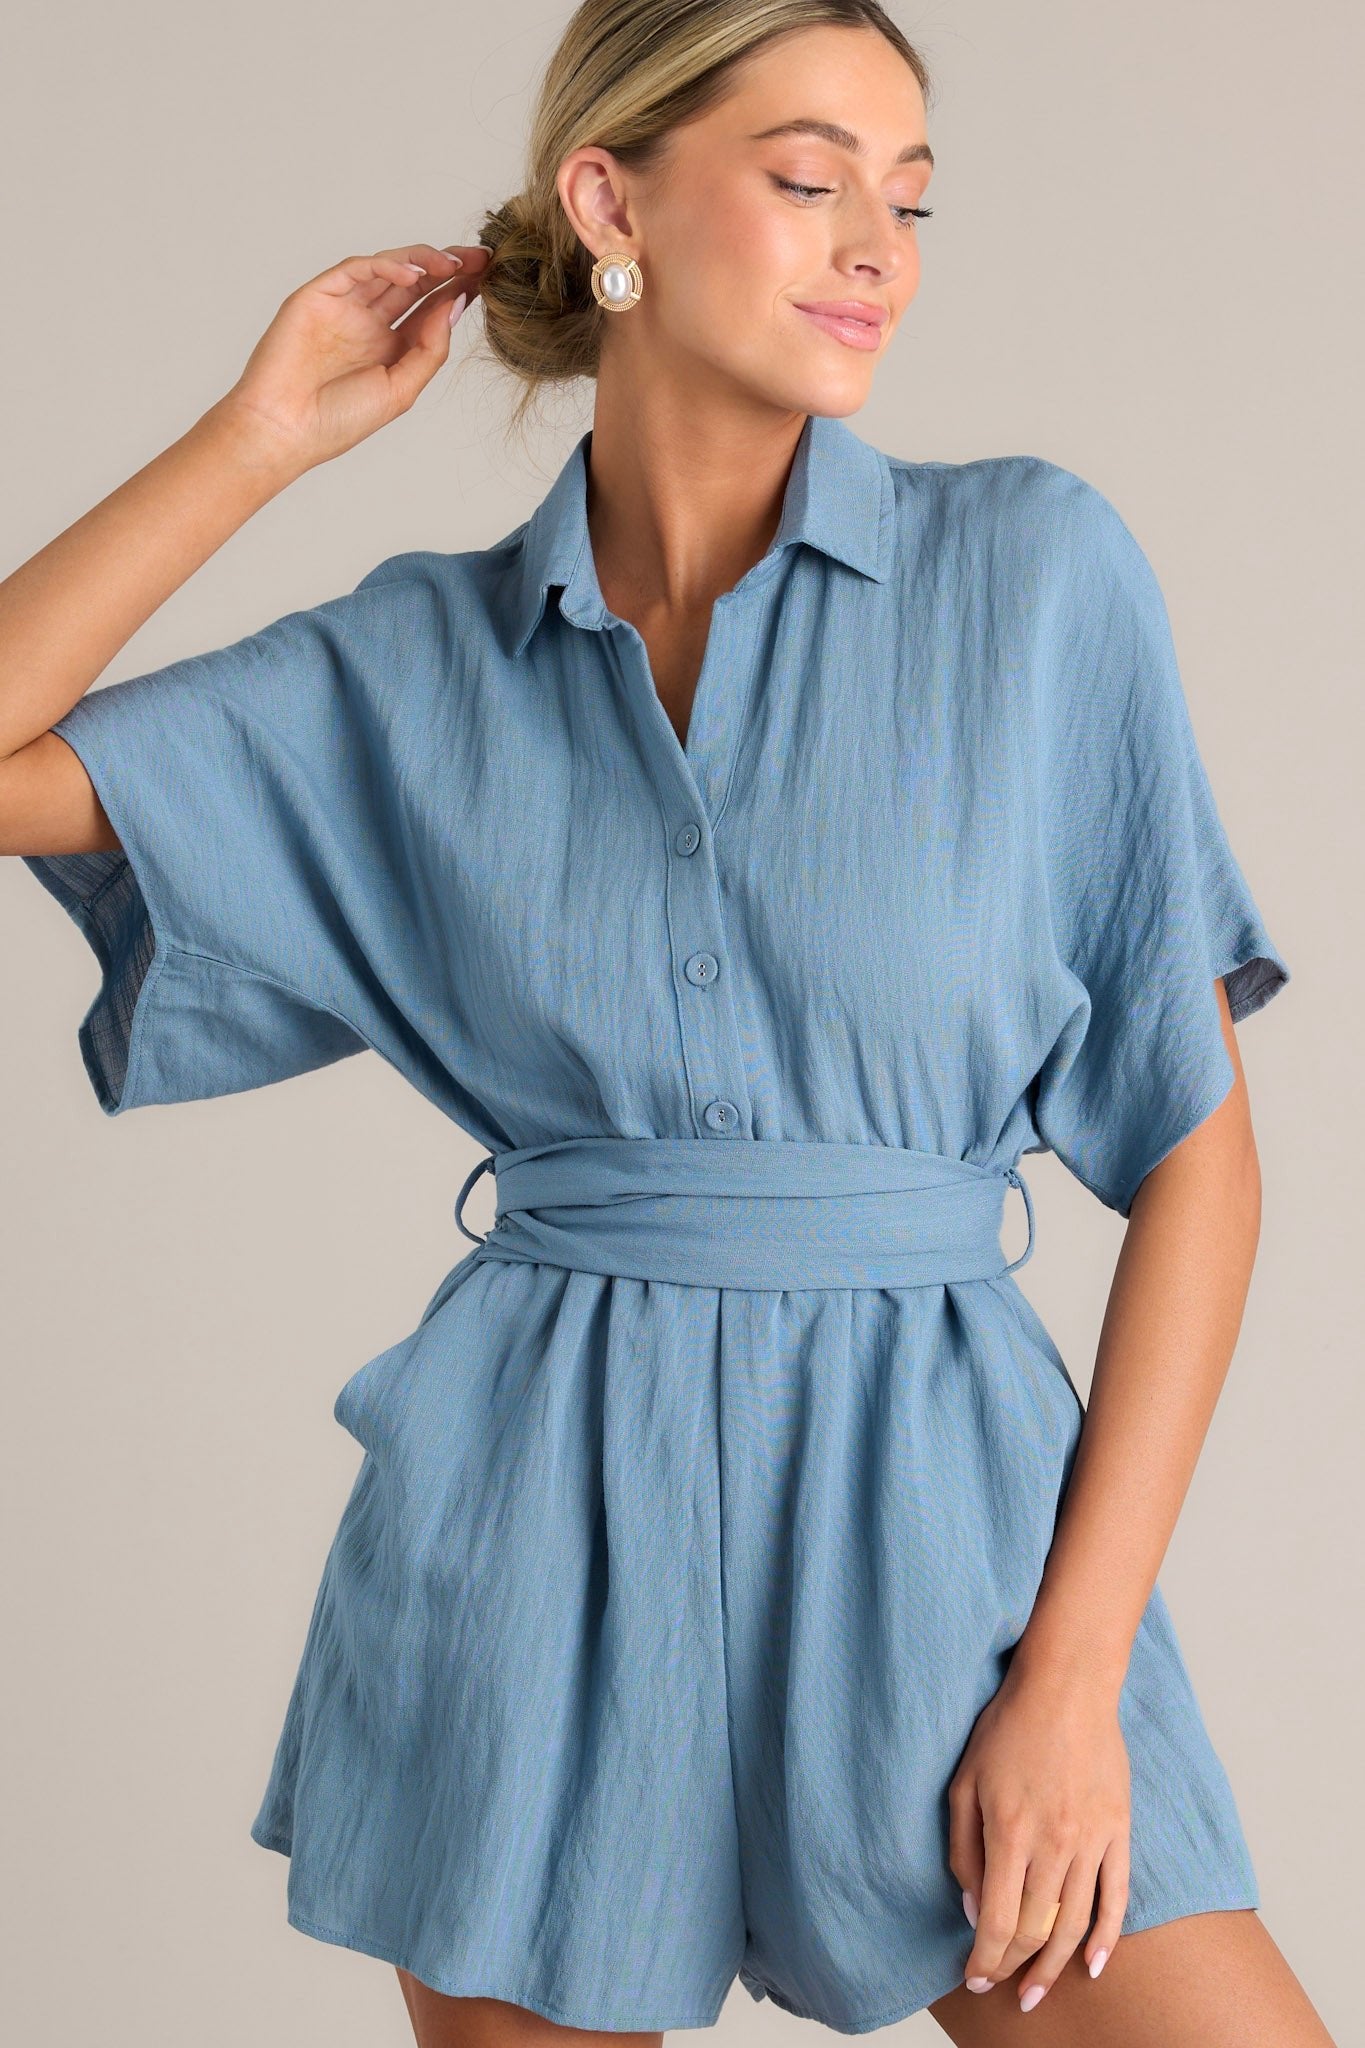 This ash blue romper features a collared neckline, a button front chest, belt loops, a self-tie waist feature, and a smocked insert at the back of the waist.